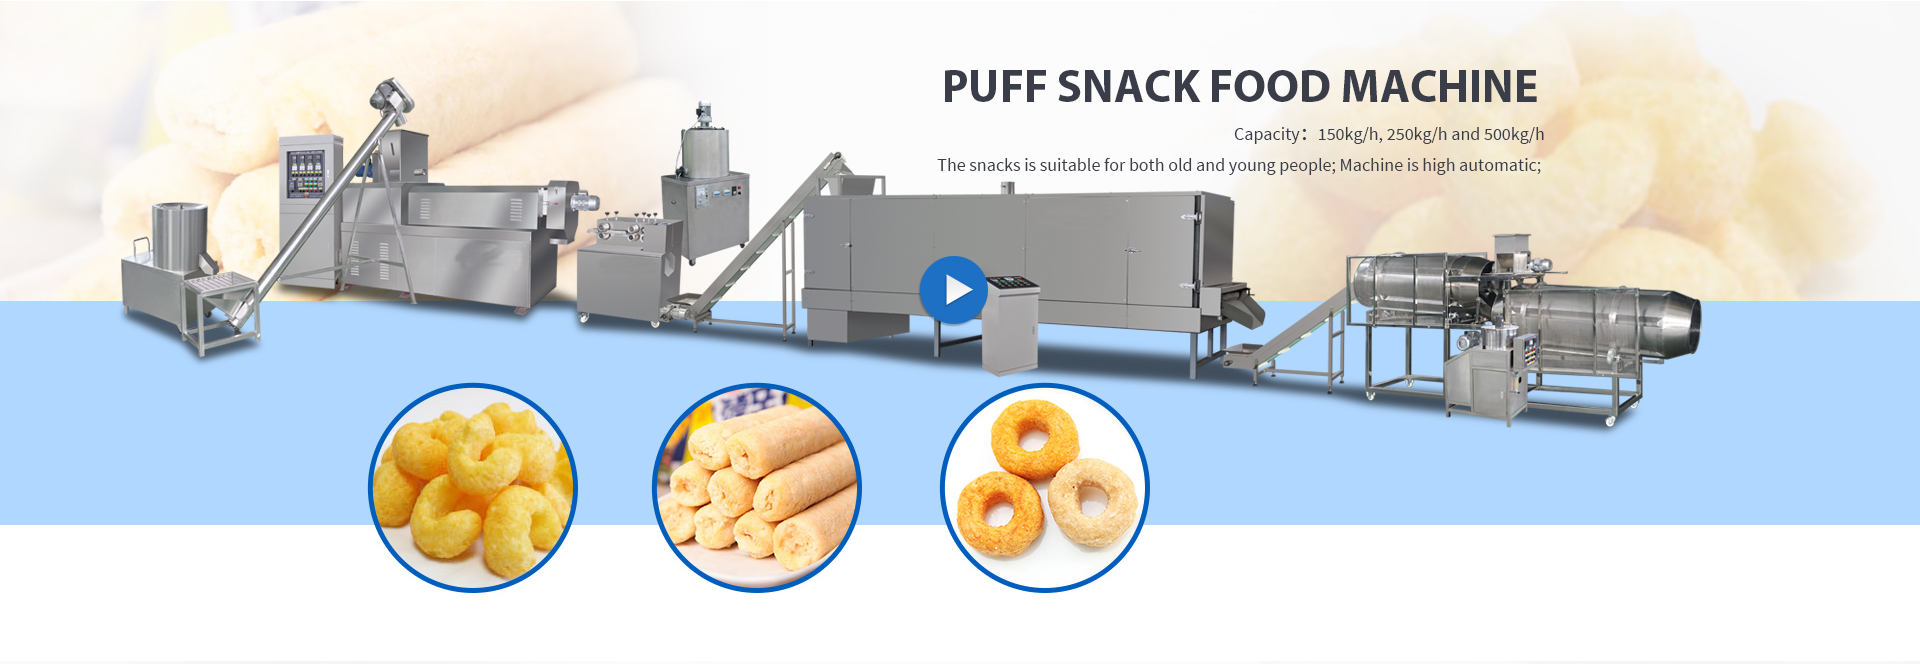 puff snacks processing line.png